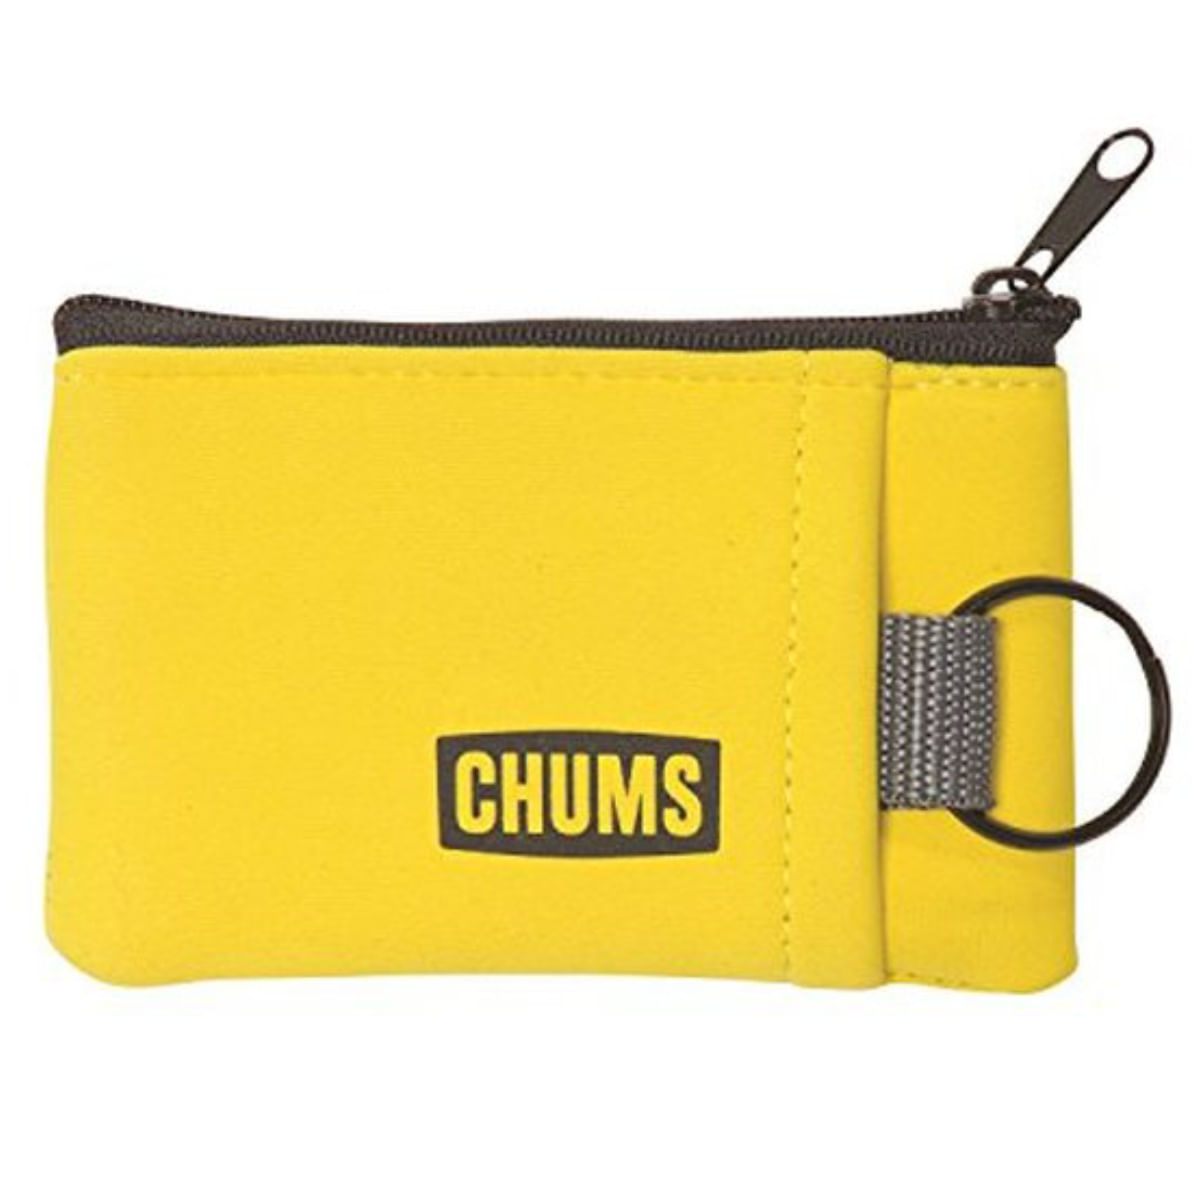 Chums Floating Marsupial Wallet and Keychain - Als.com